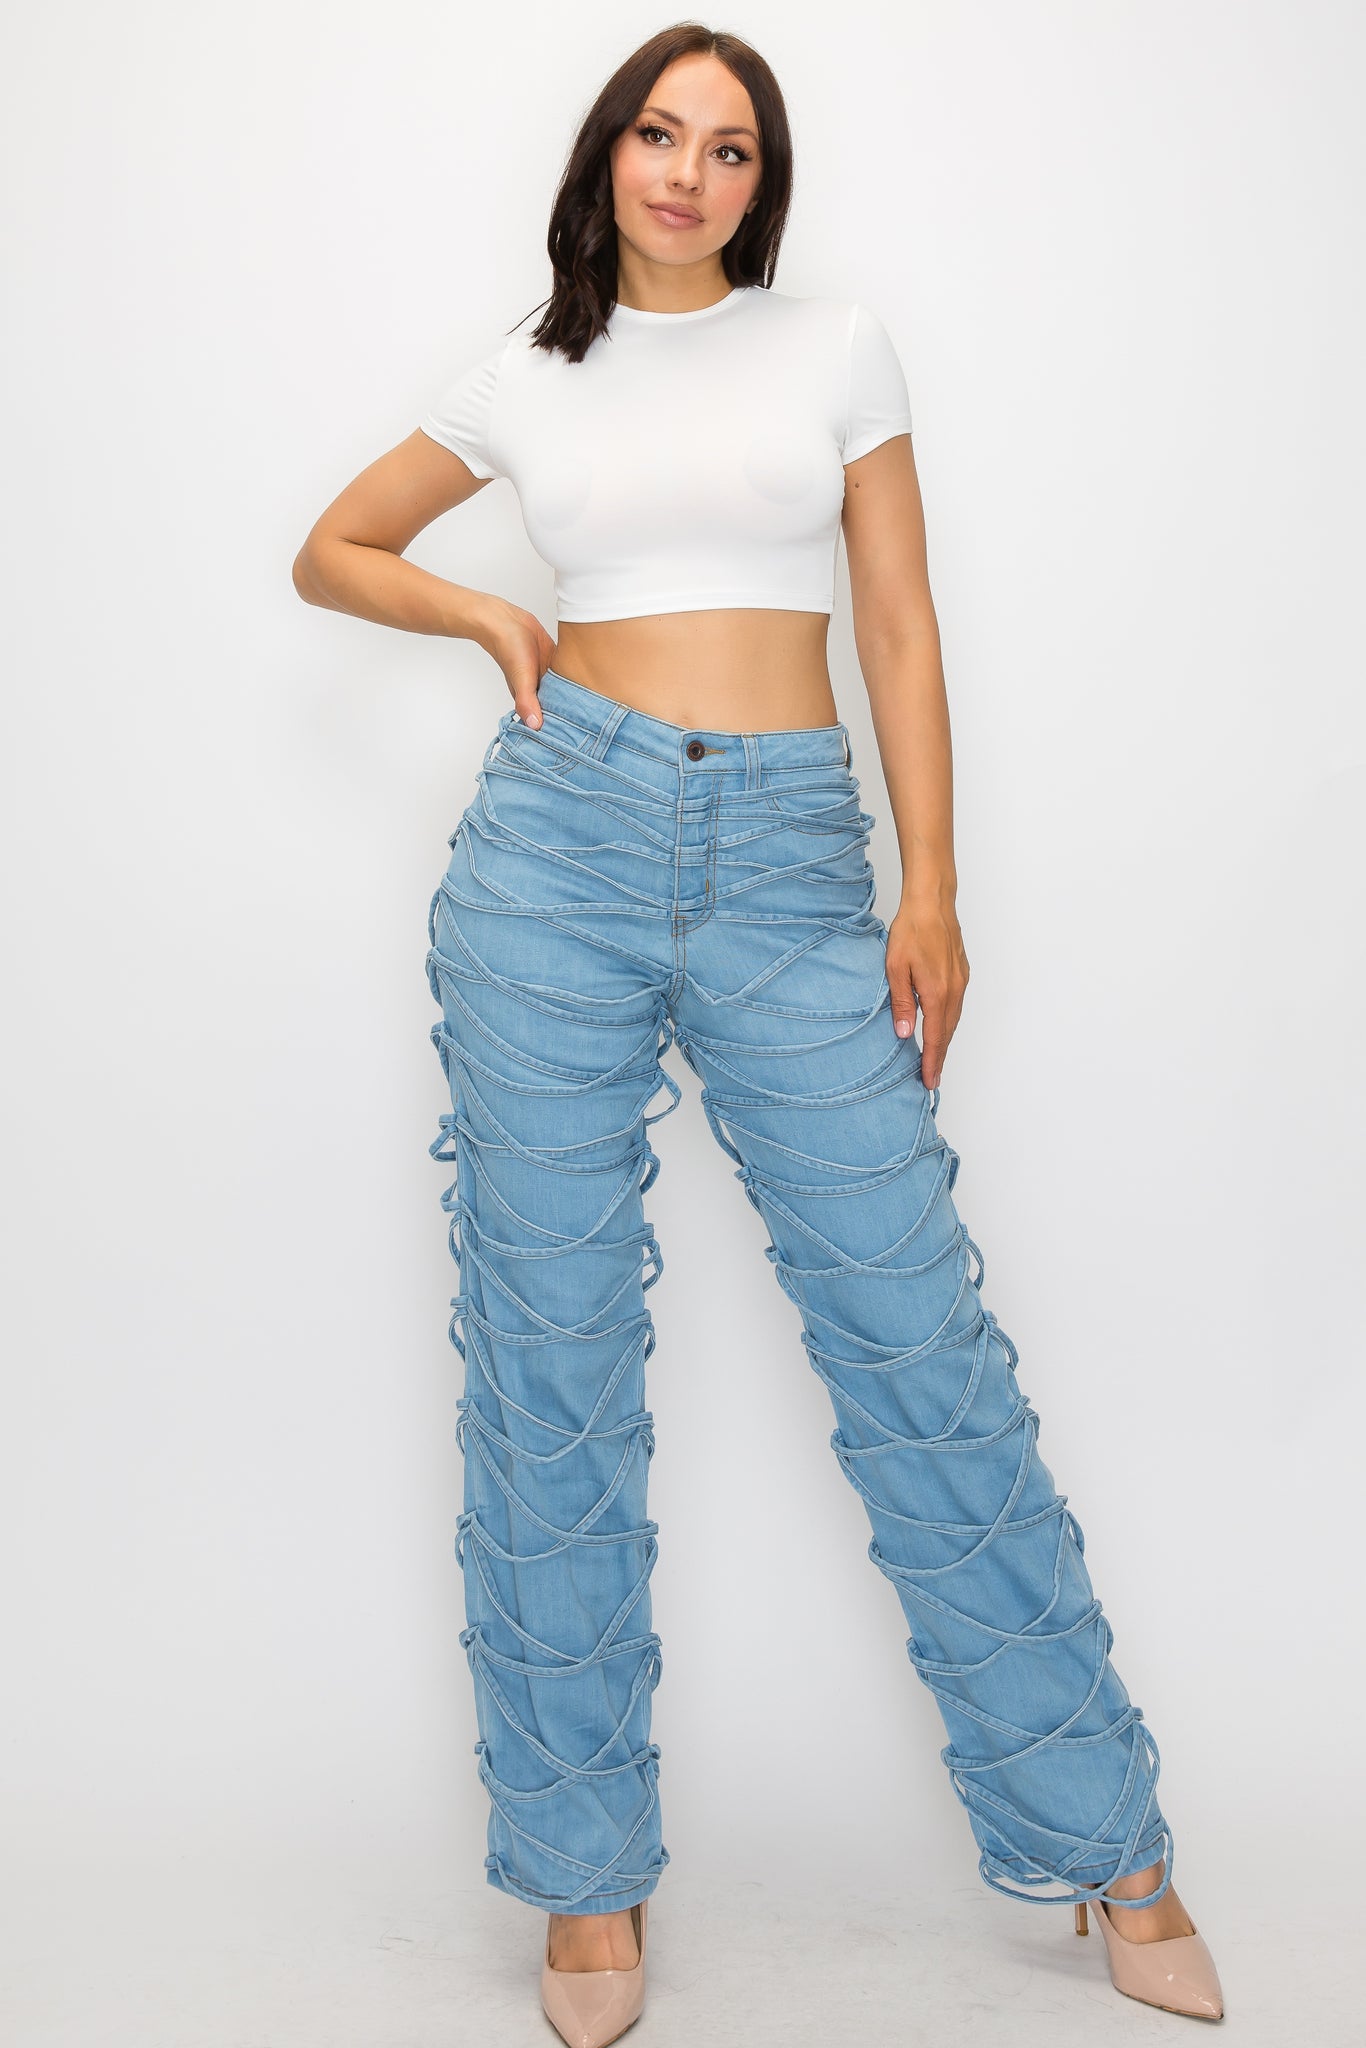 40582 Women's Mid Rise Straight Legged Jeans W/Laced up Legs